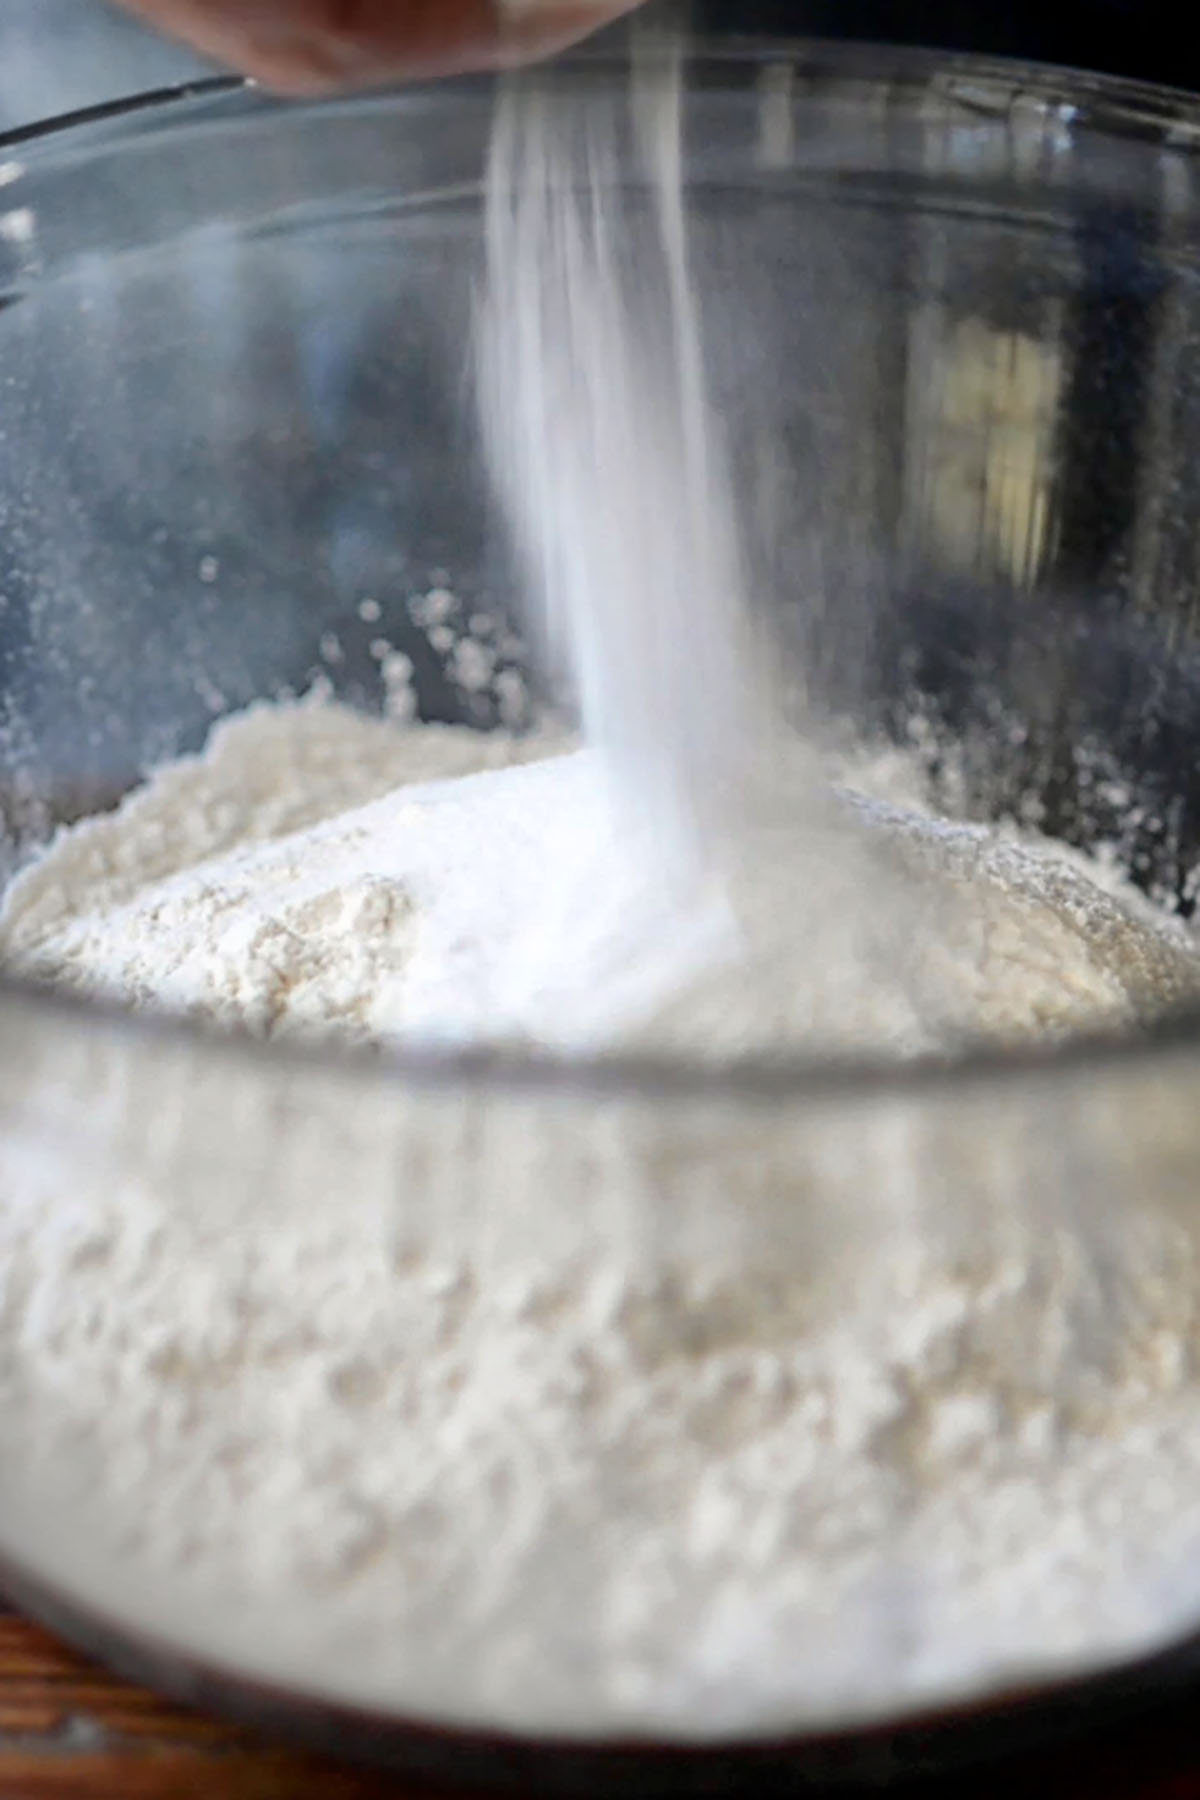 Flour in a glass mixing bowl.